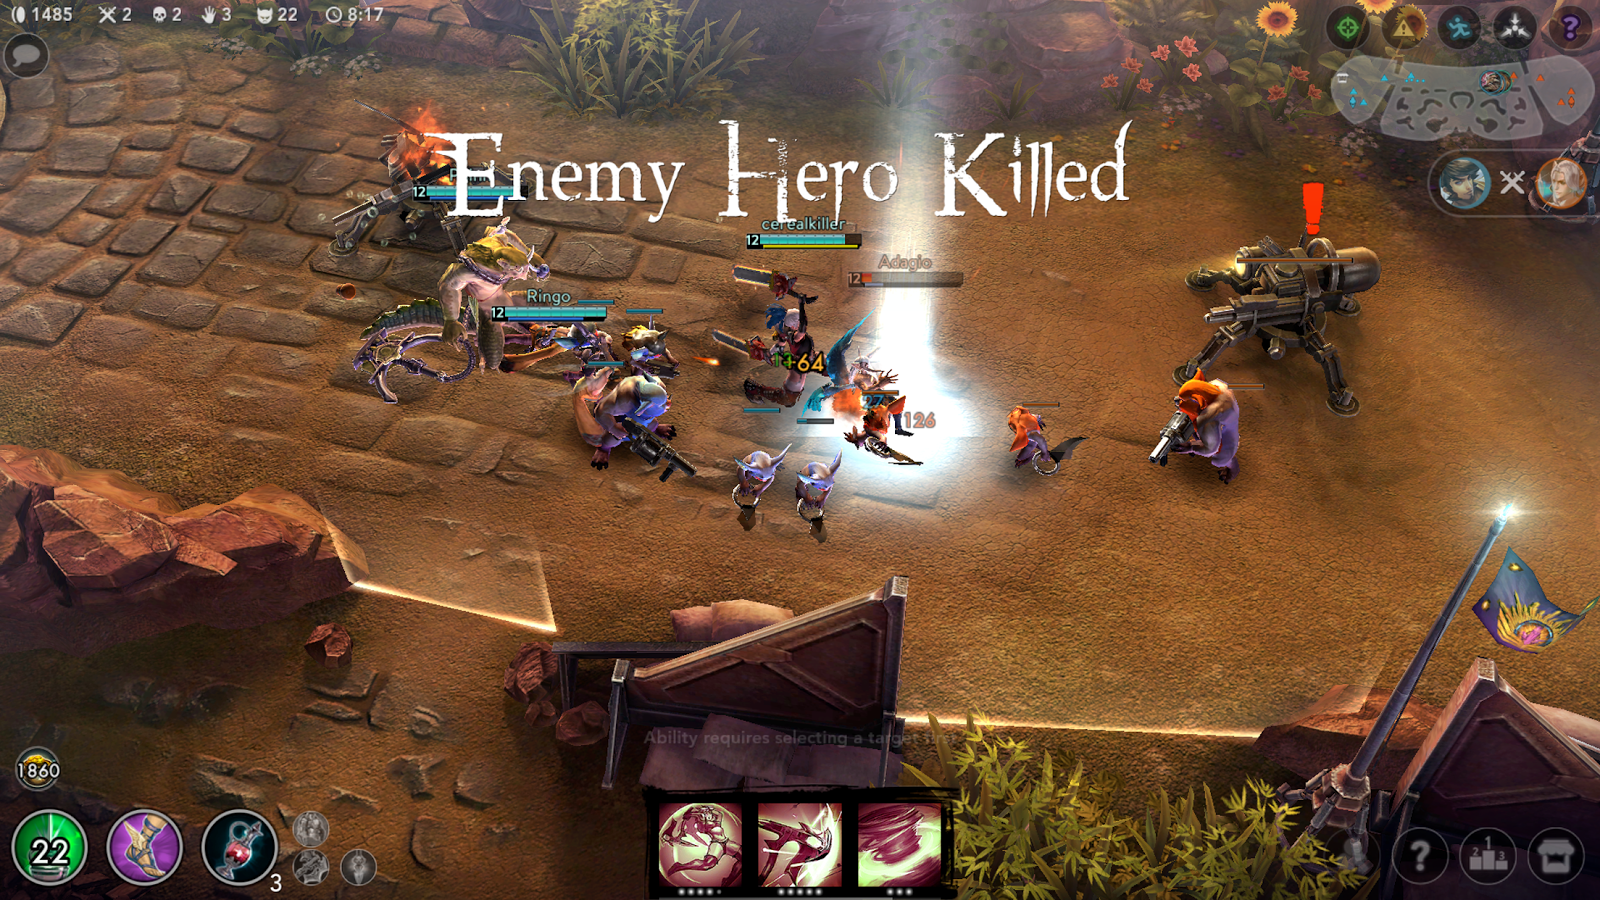 GameBench reveals the most fluid and lag-free MOBA games on mobile